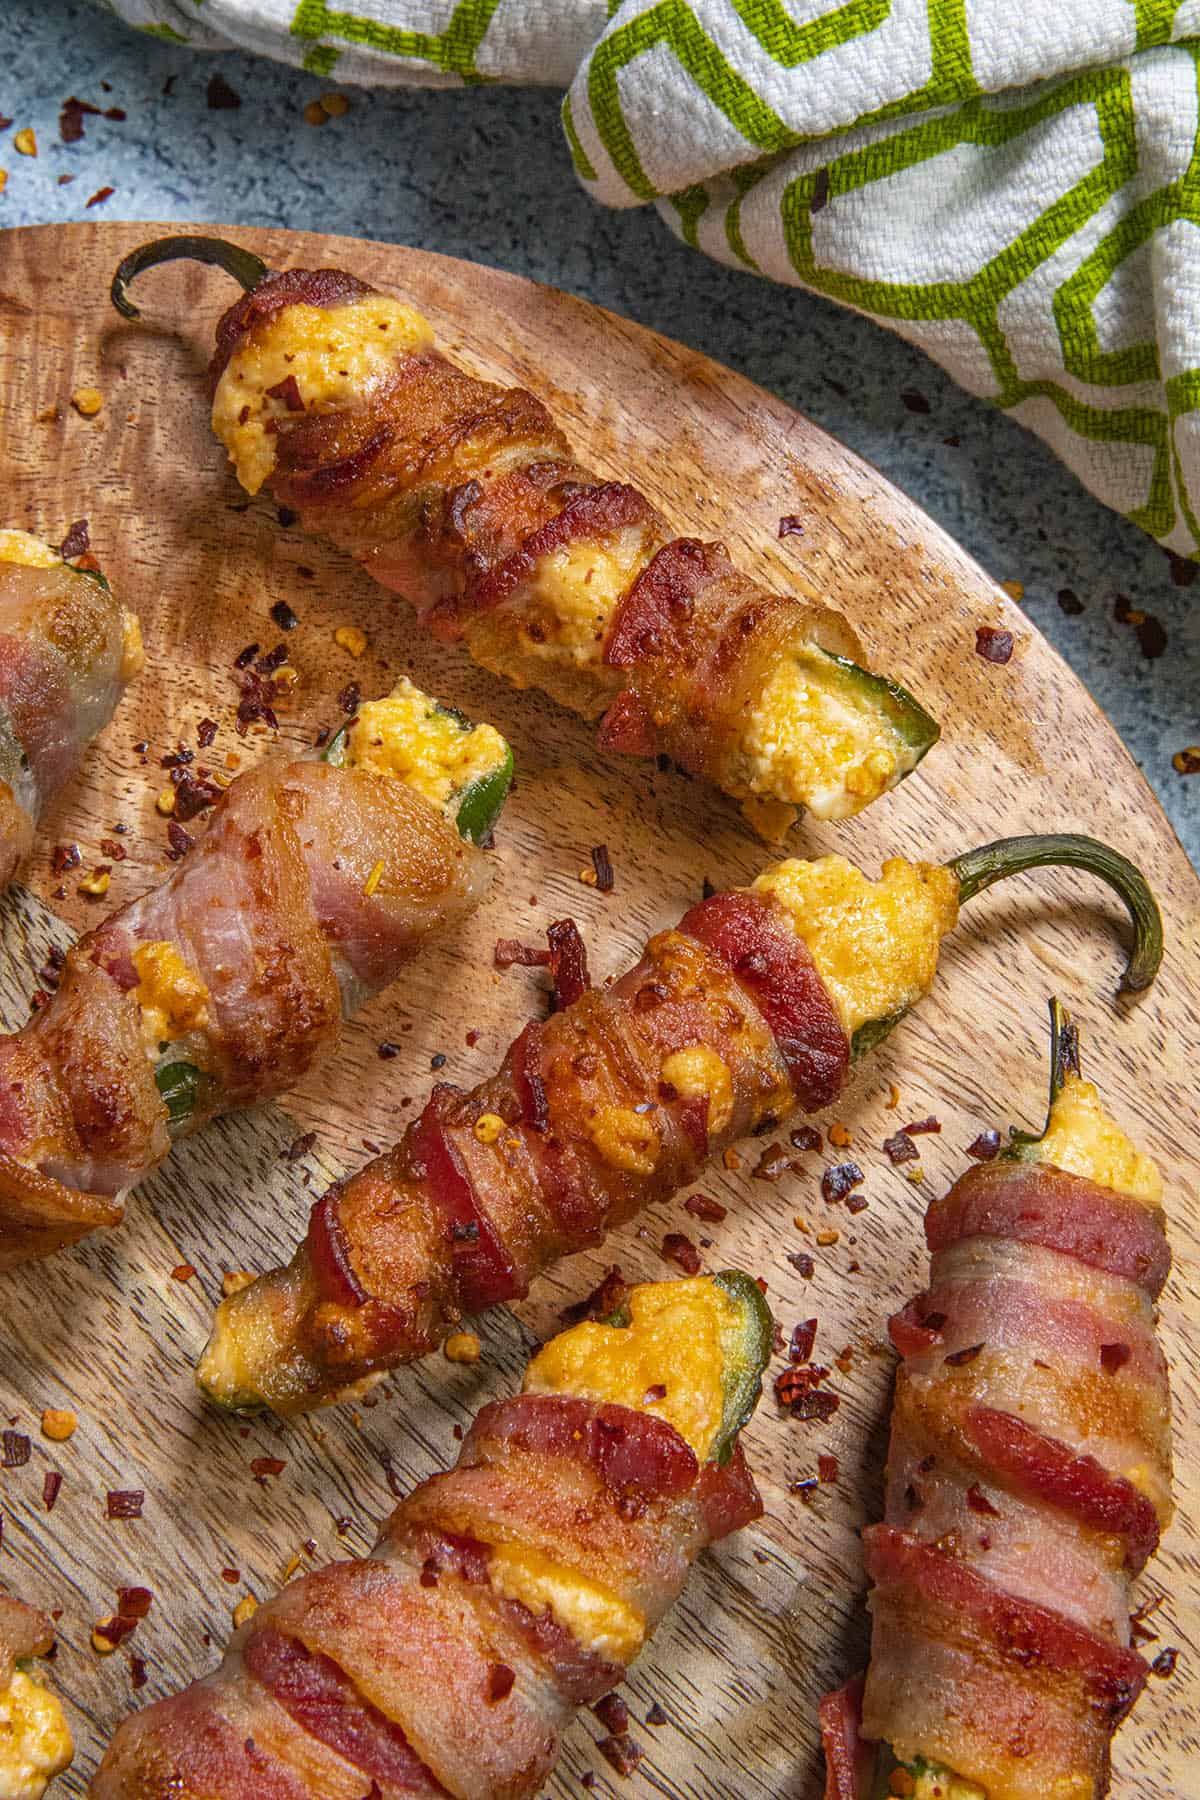 Air Fryer Jalapeno Poppers wrapped in bacon